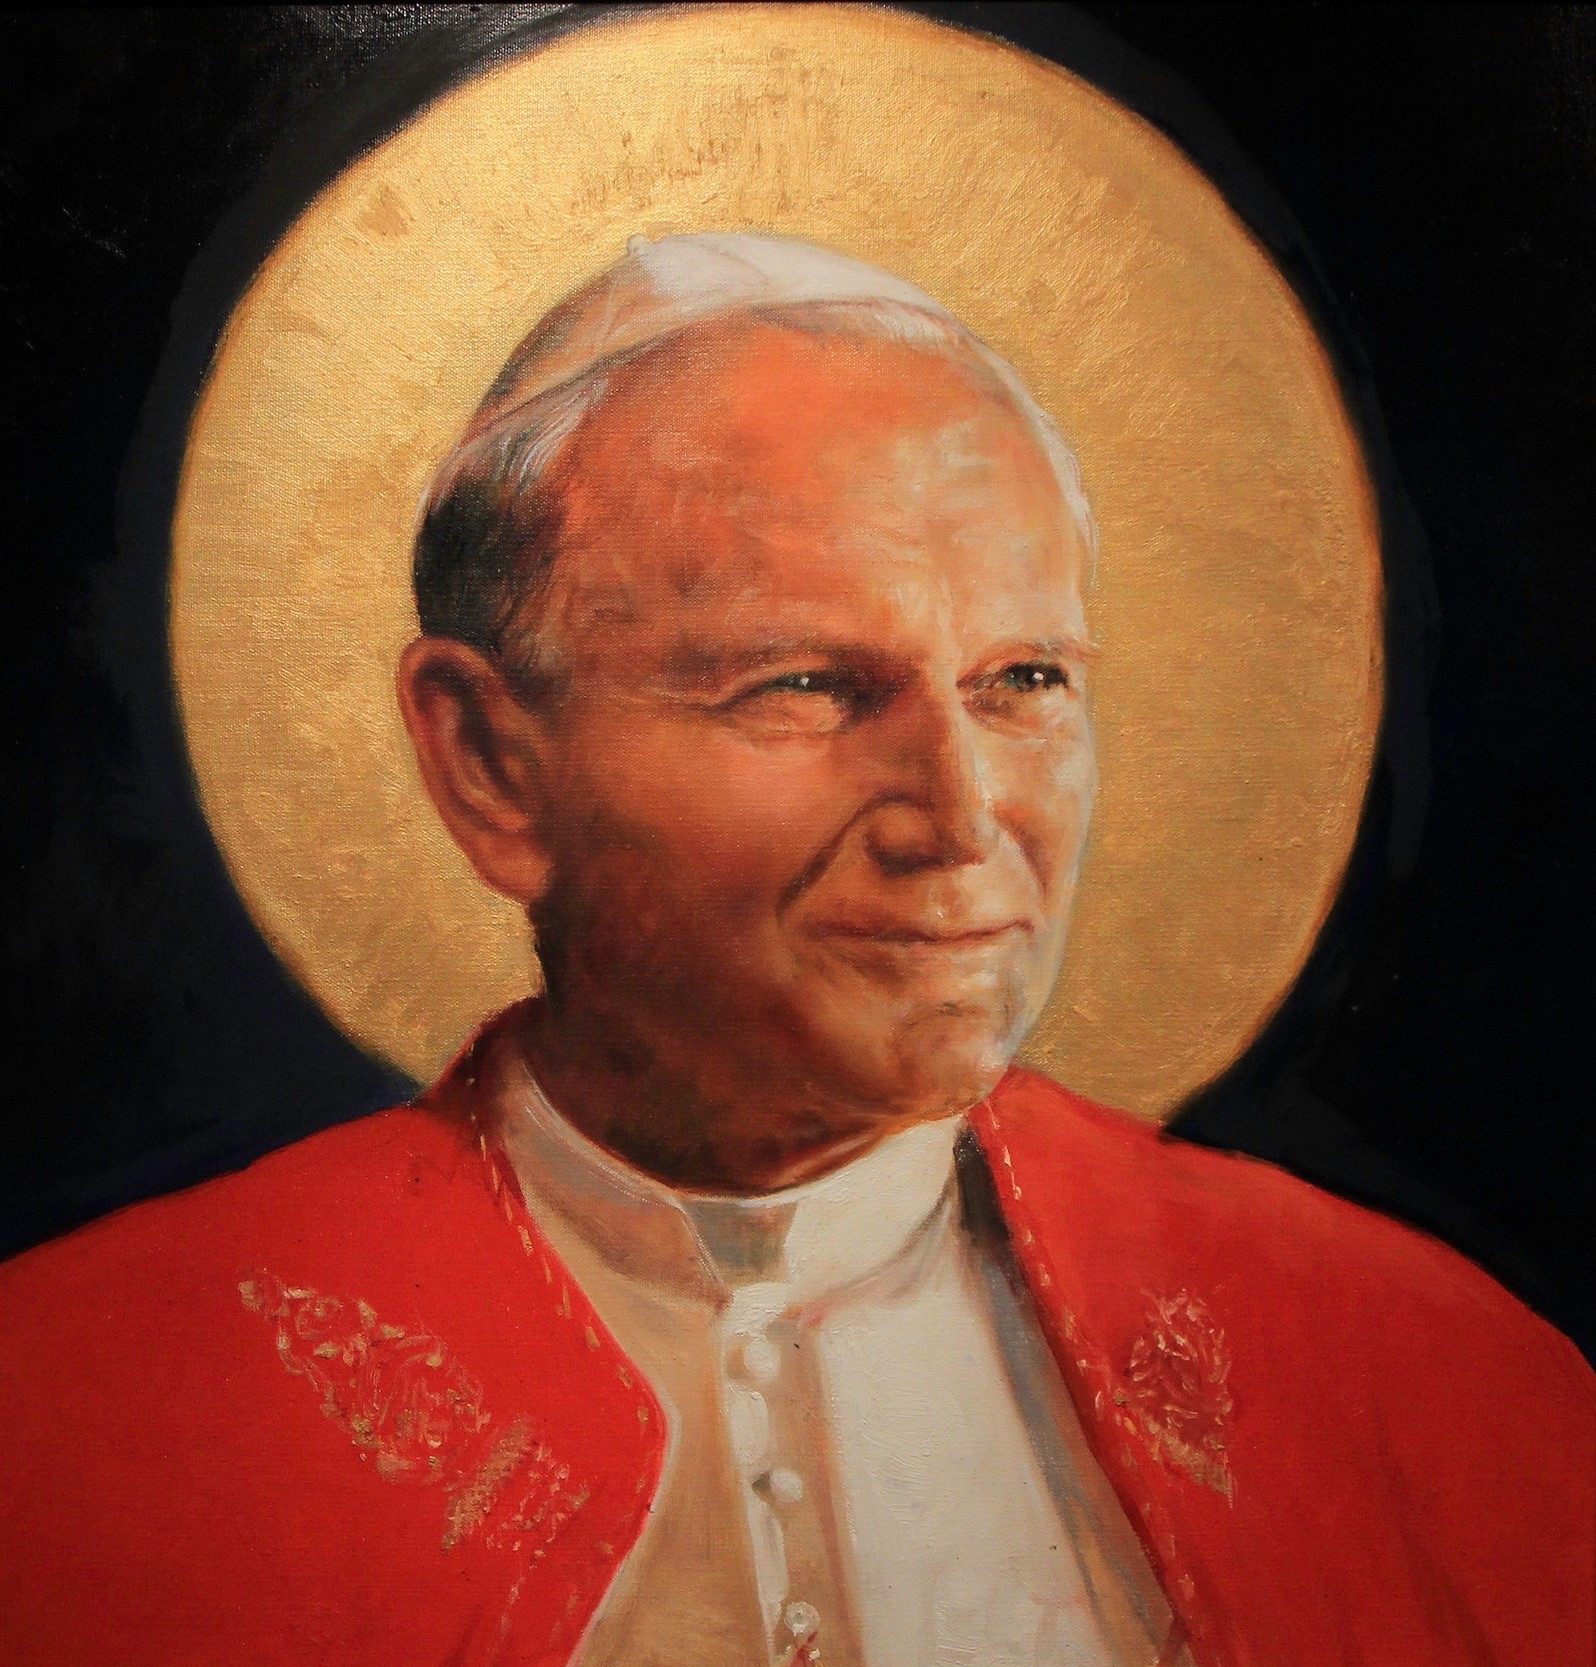 St. Pope John Paul II: A Call For Each of Us to Spread the Good News